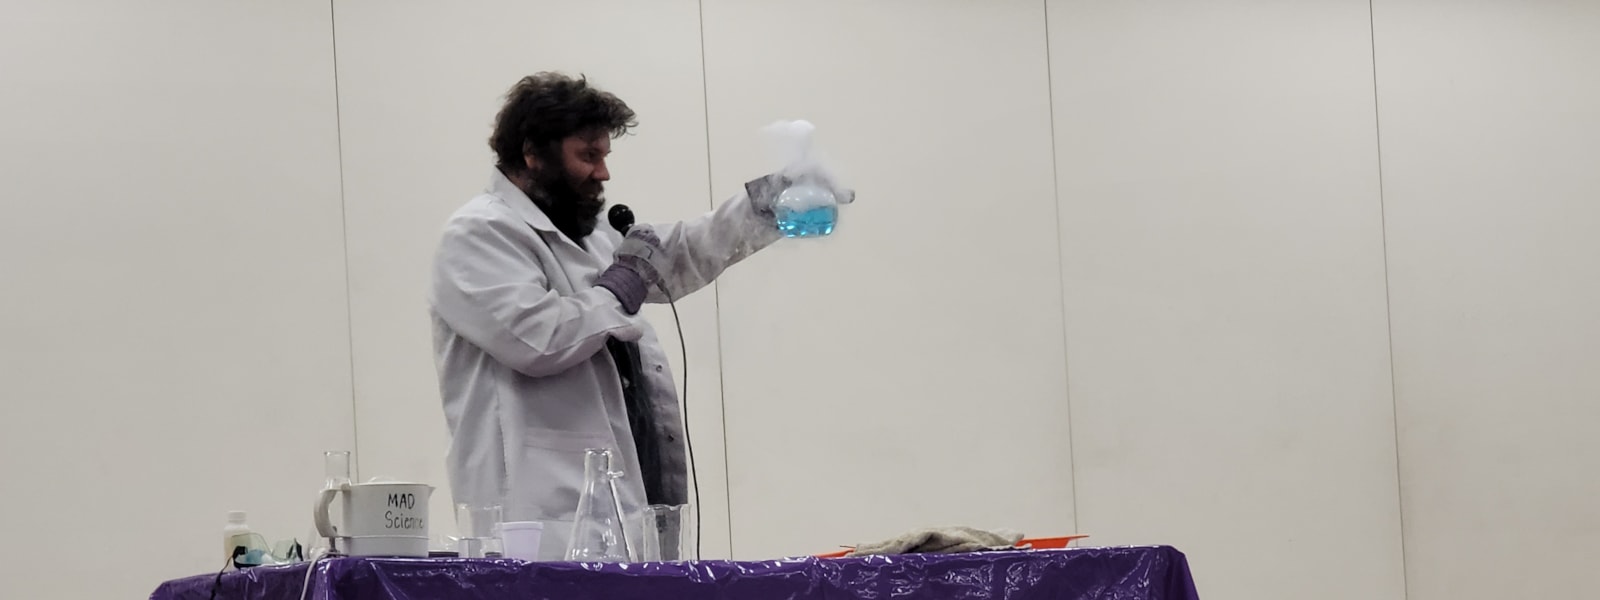 Man in la white lab coat speaking into a mic and holding a glass container with a blue liquid.